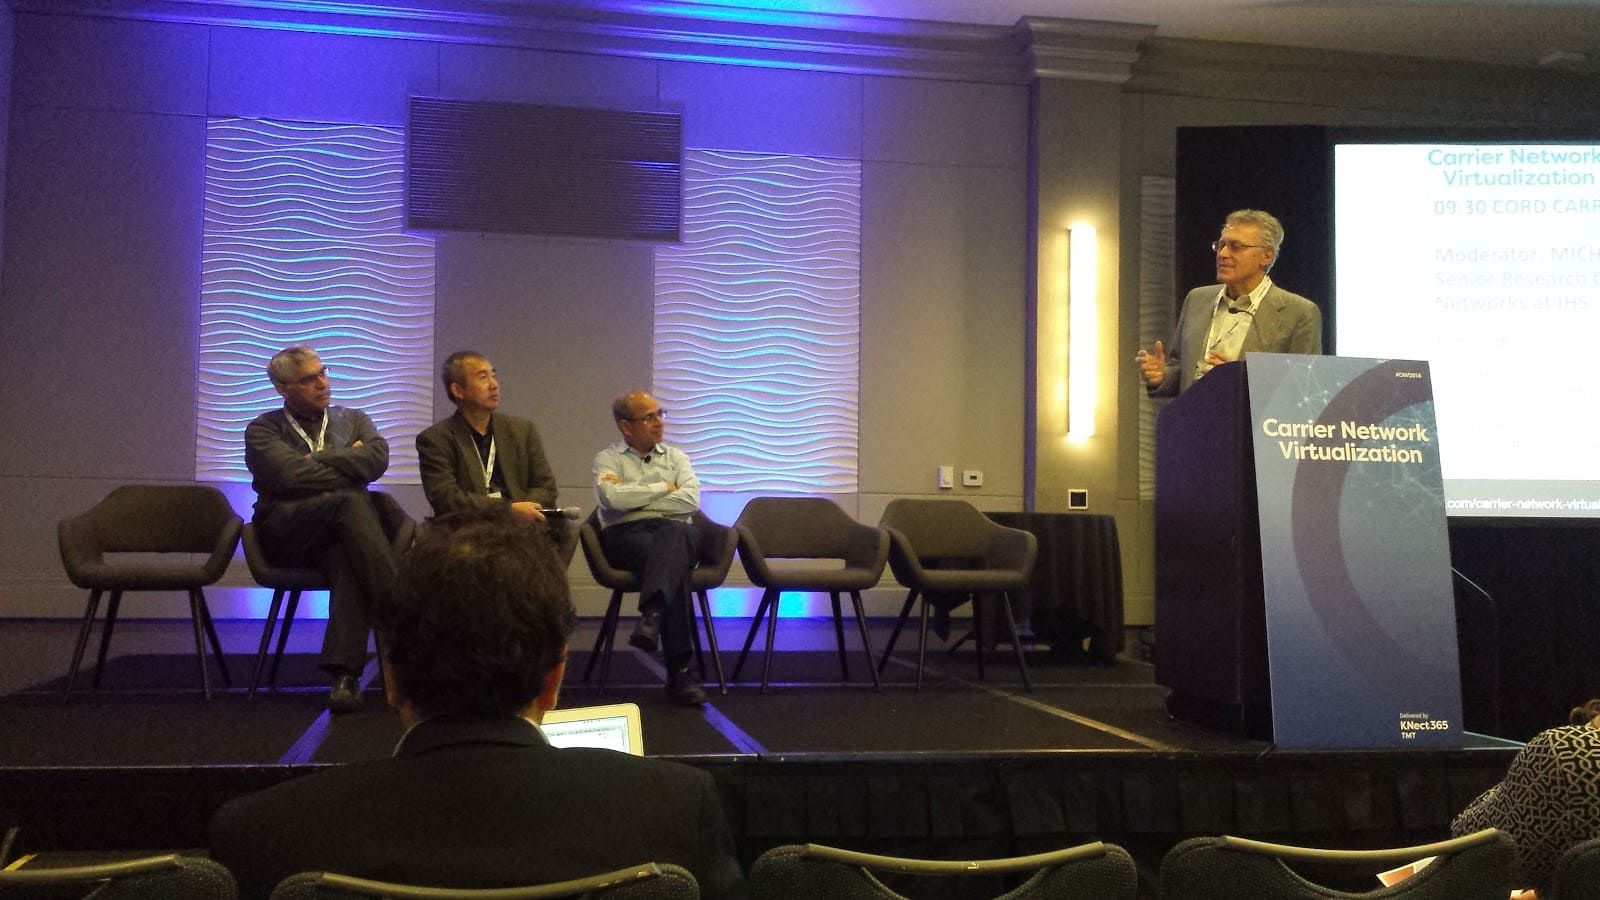 Michael Howard moderating the CORD panel at the Carrier Network Virtualization conference.